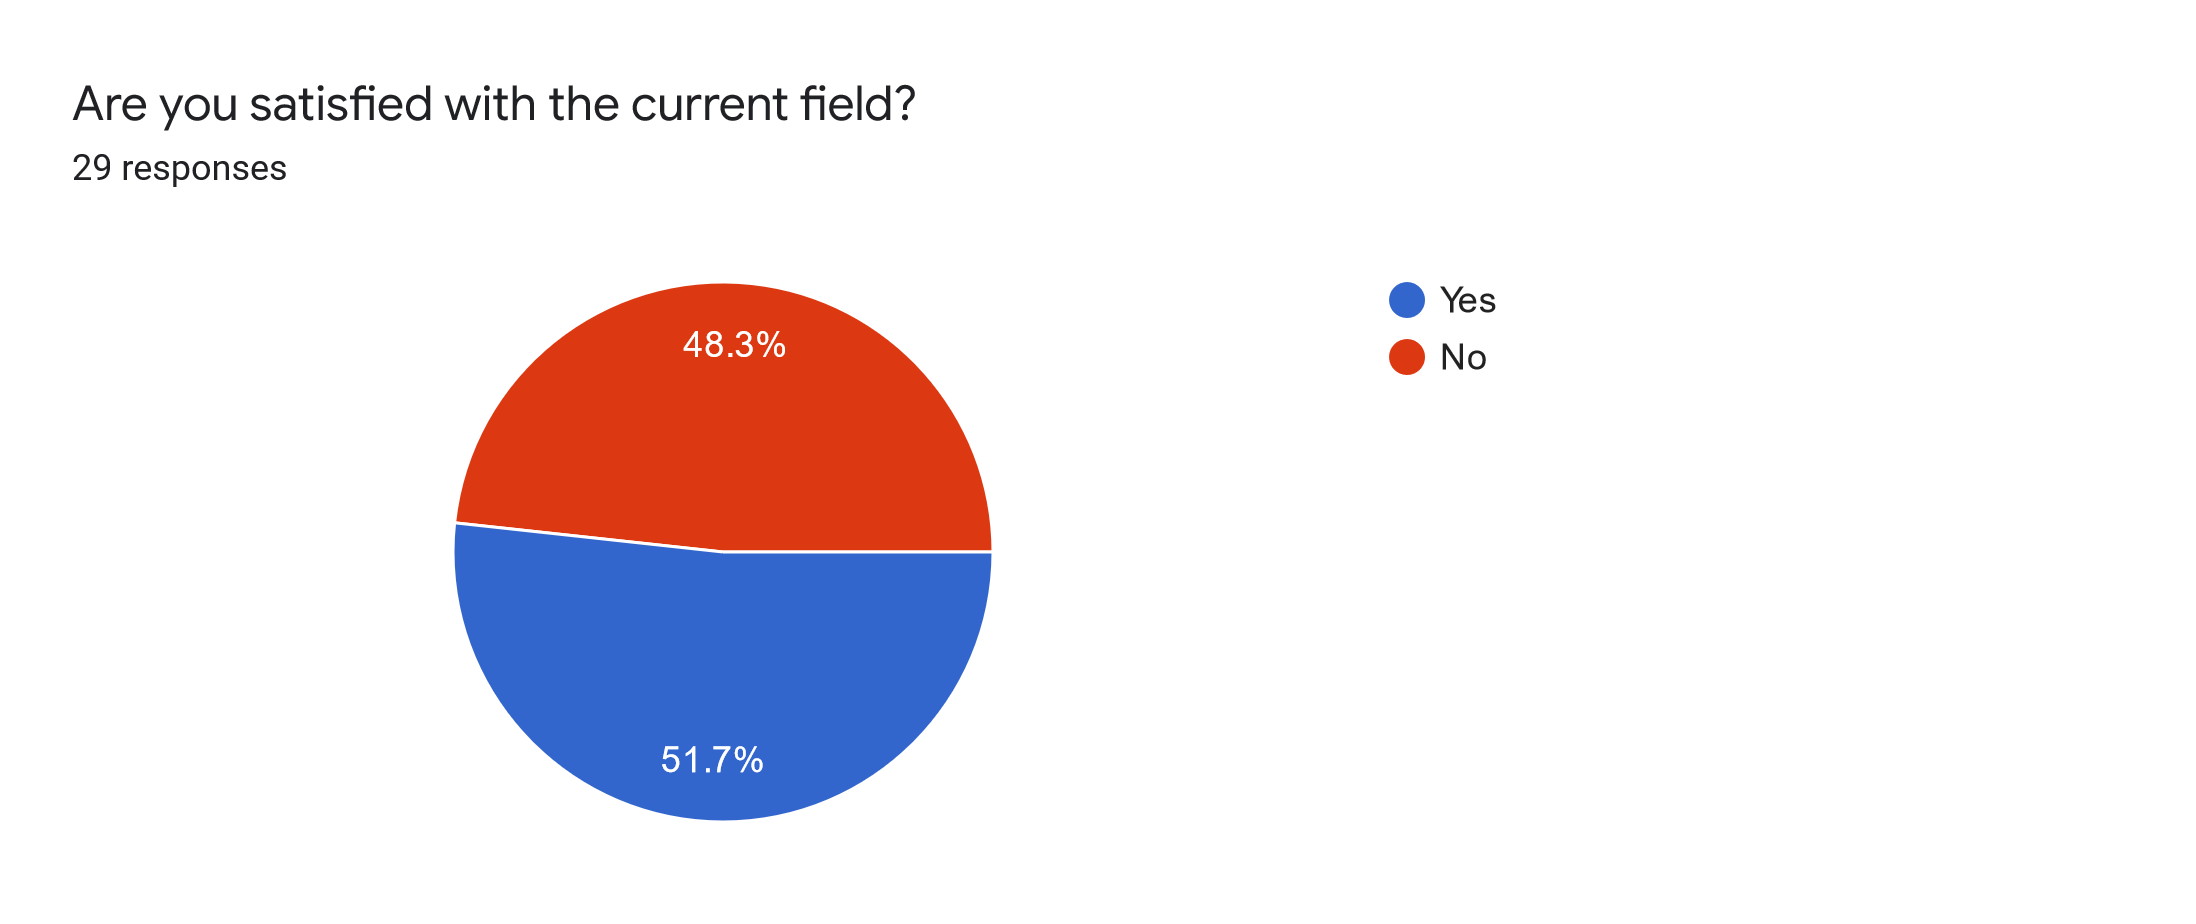 Forms response chart. Question title: Are you satisfied with the current field?. Number of responses: 29 responses.